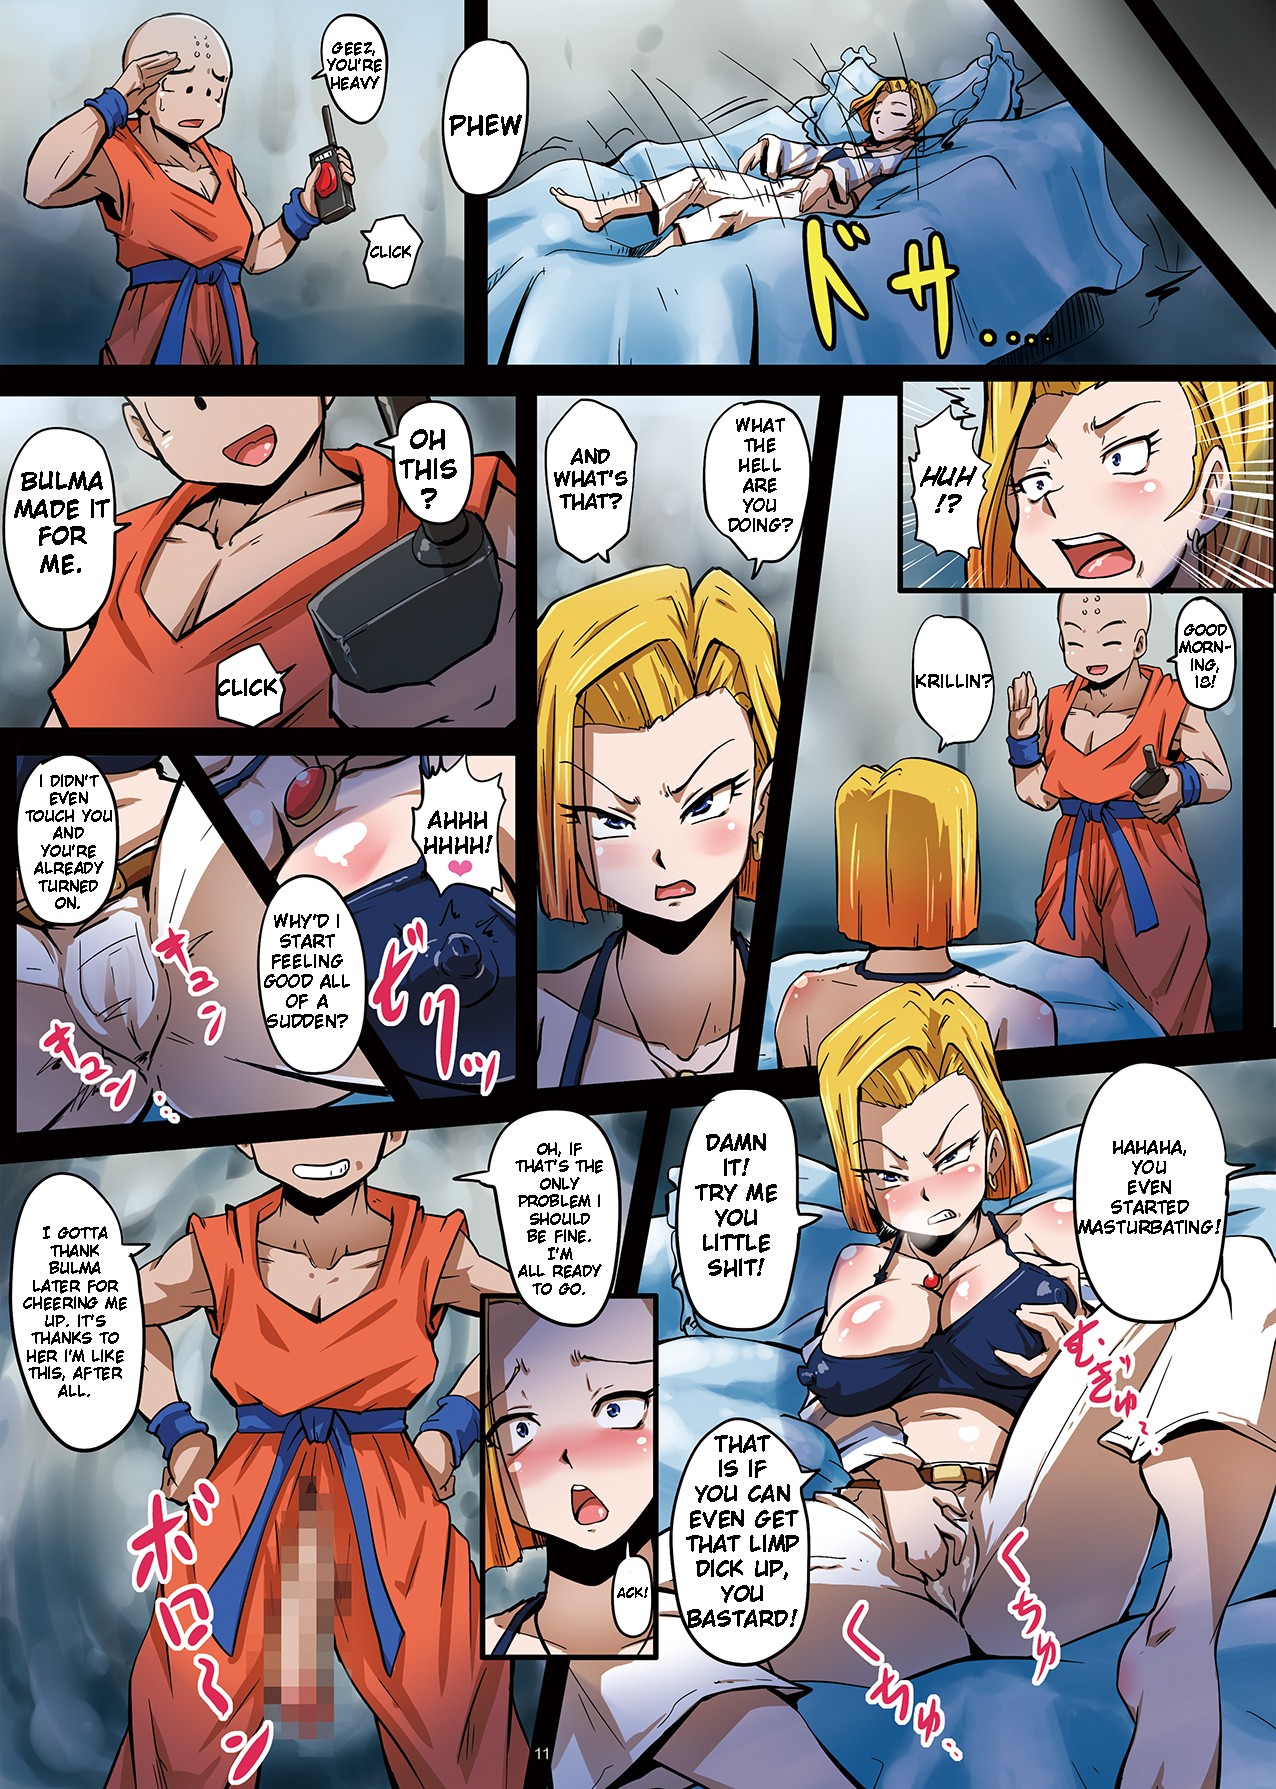 The Plan to Subjugate 18 Bulma and Krillin's Conspiracy to Turn 18 Into a Sex Slave 12